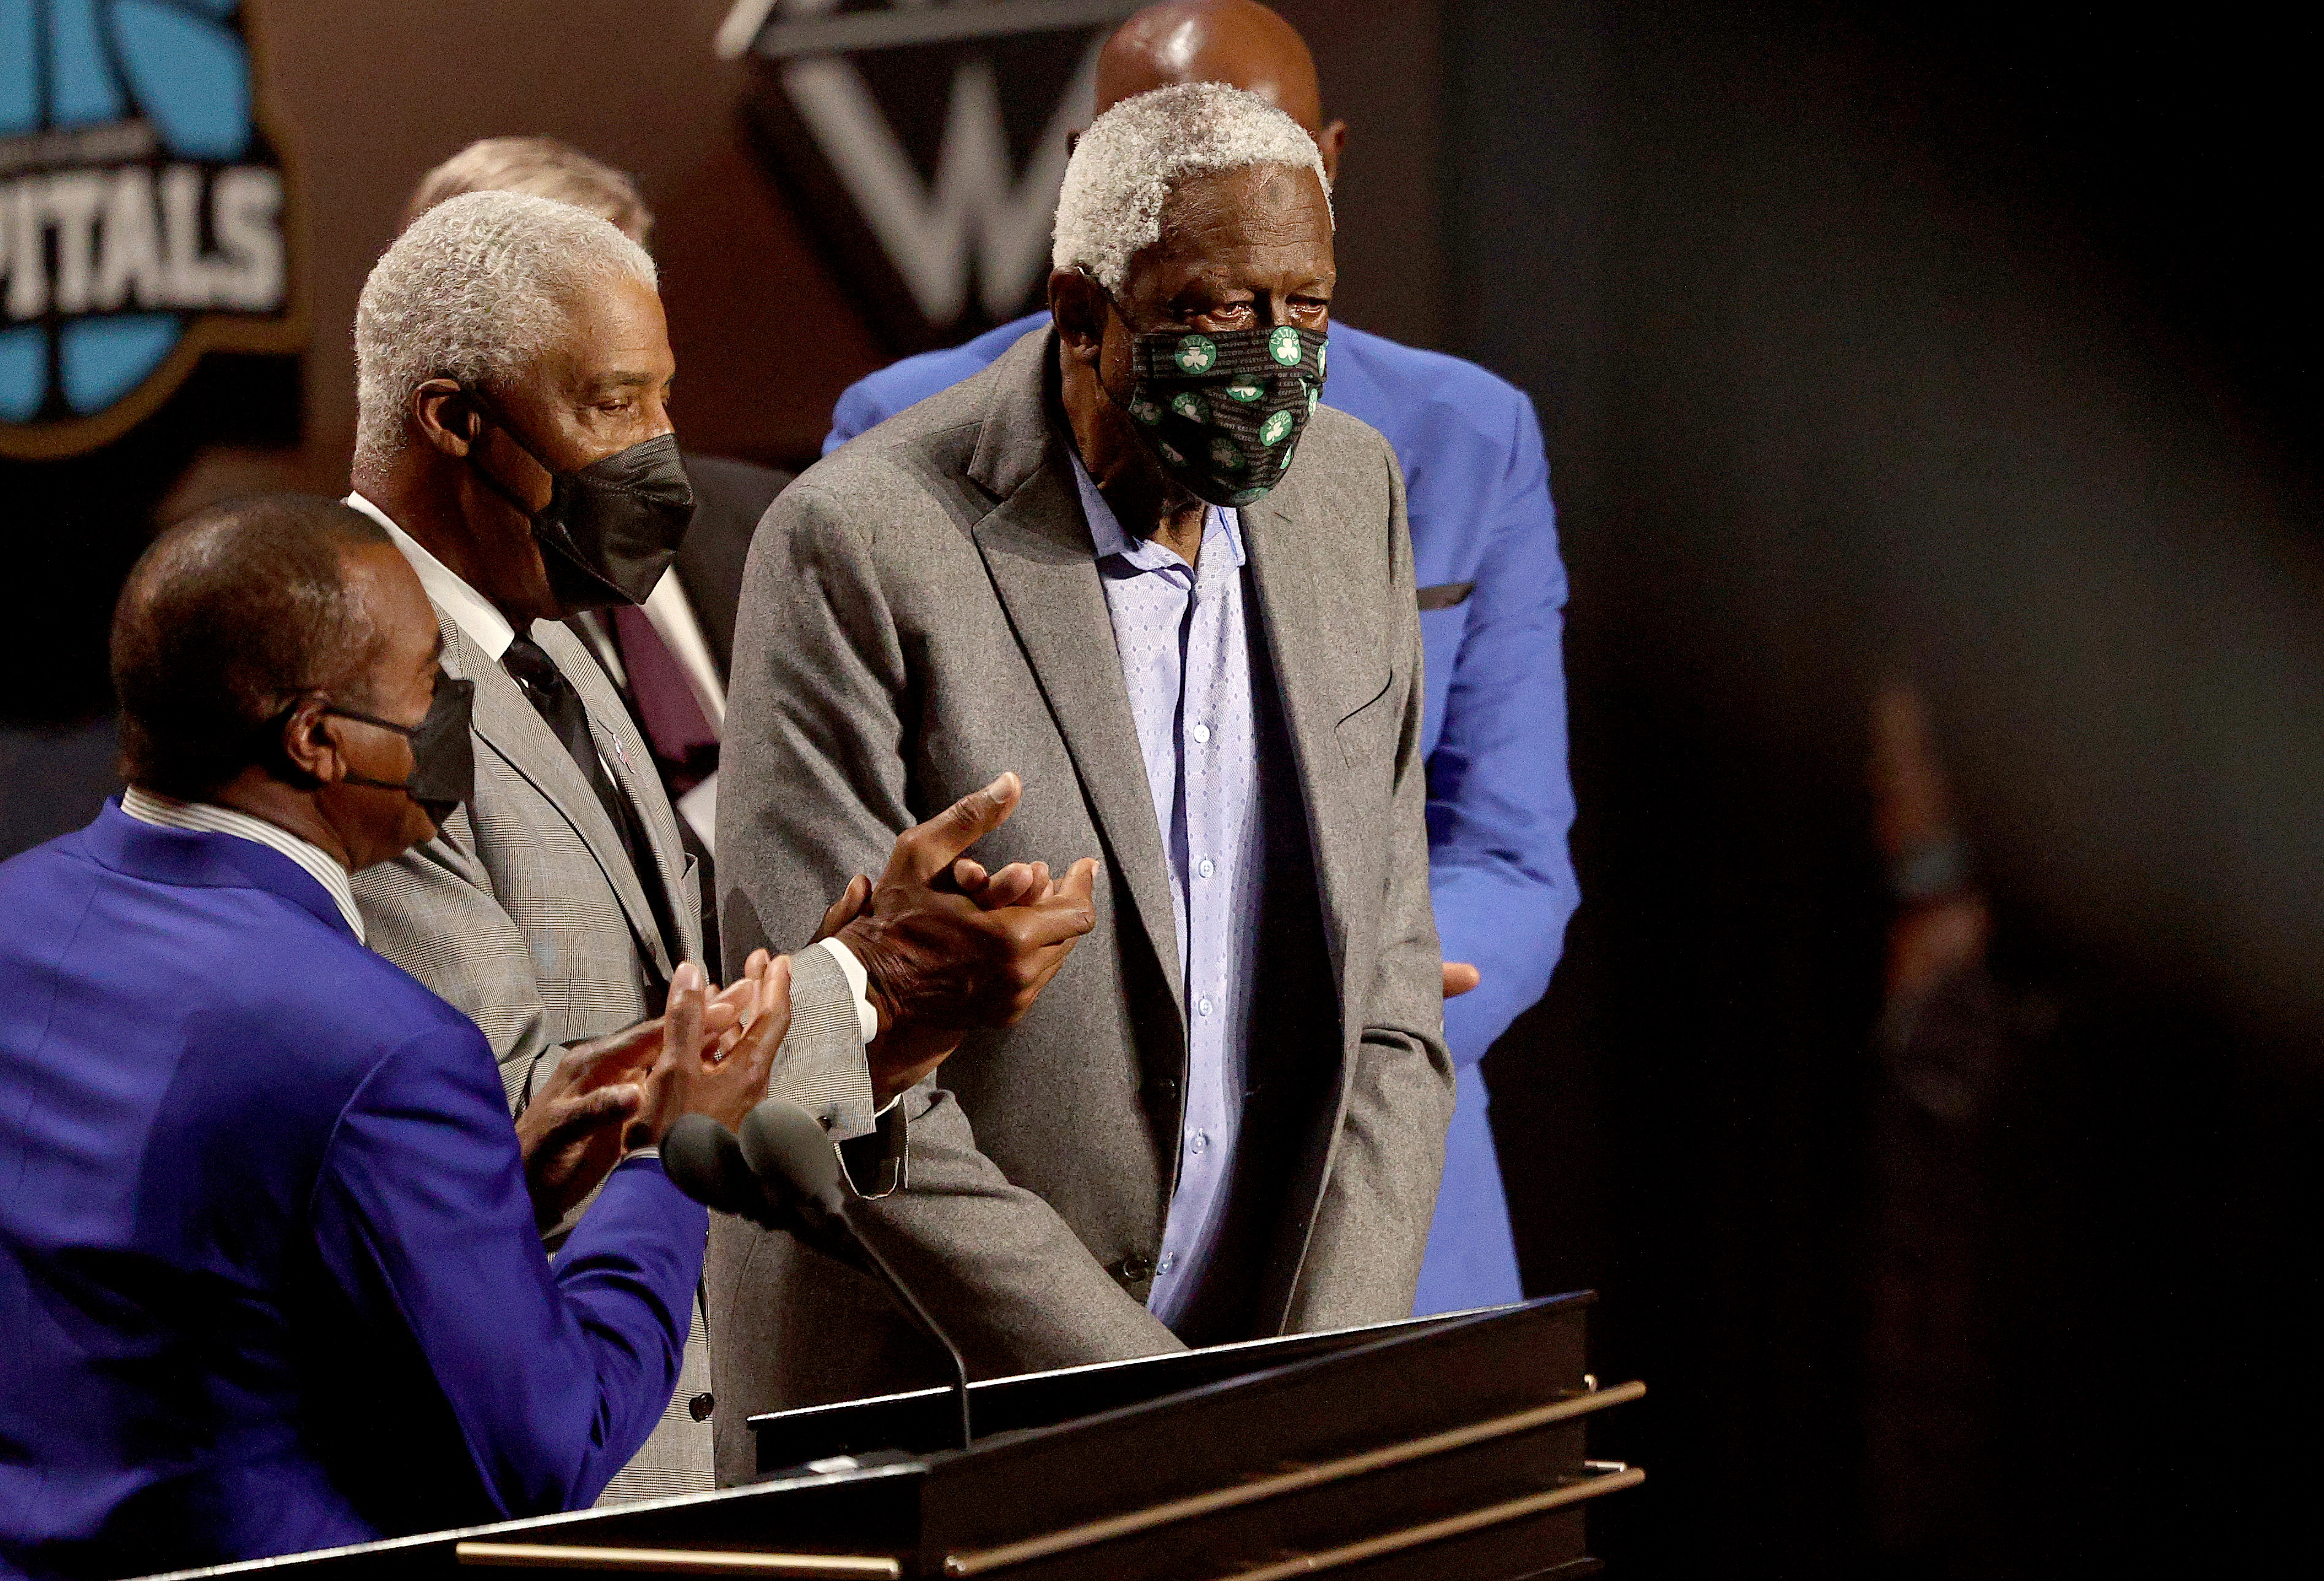 Celtics legend Bill Russell receives second induction into Basketball Hall  of Fame, as coach this time - The Boston Globe